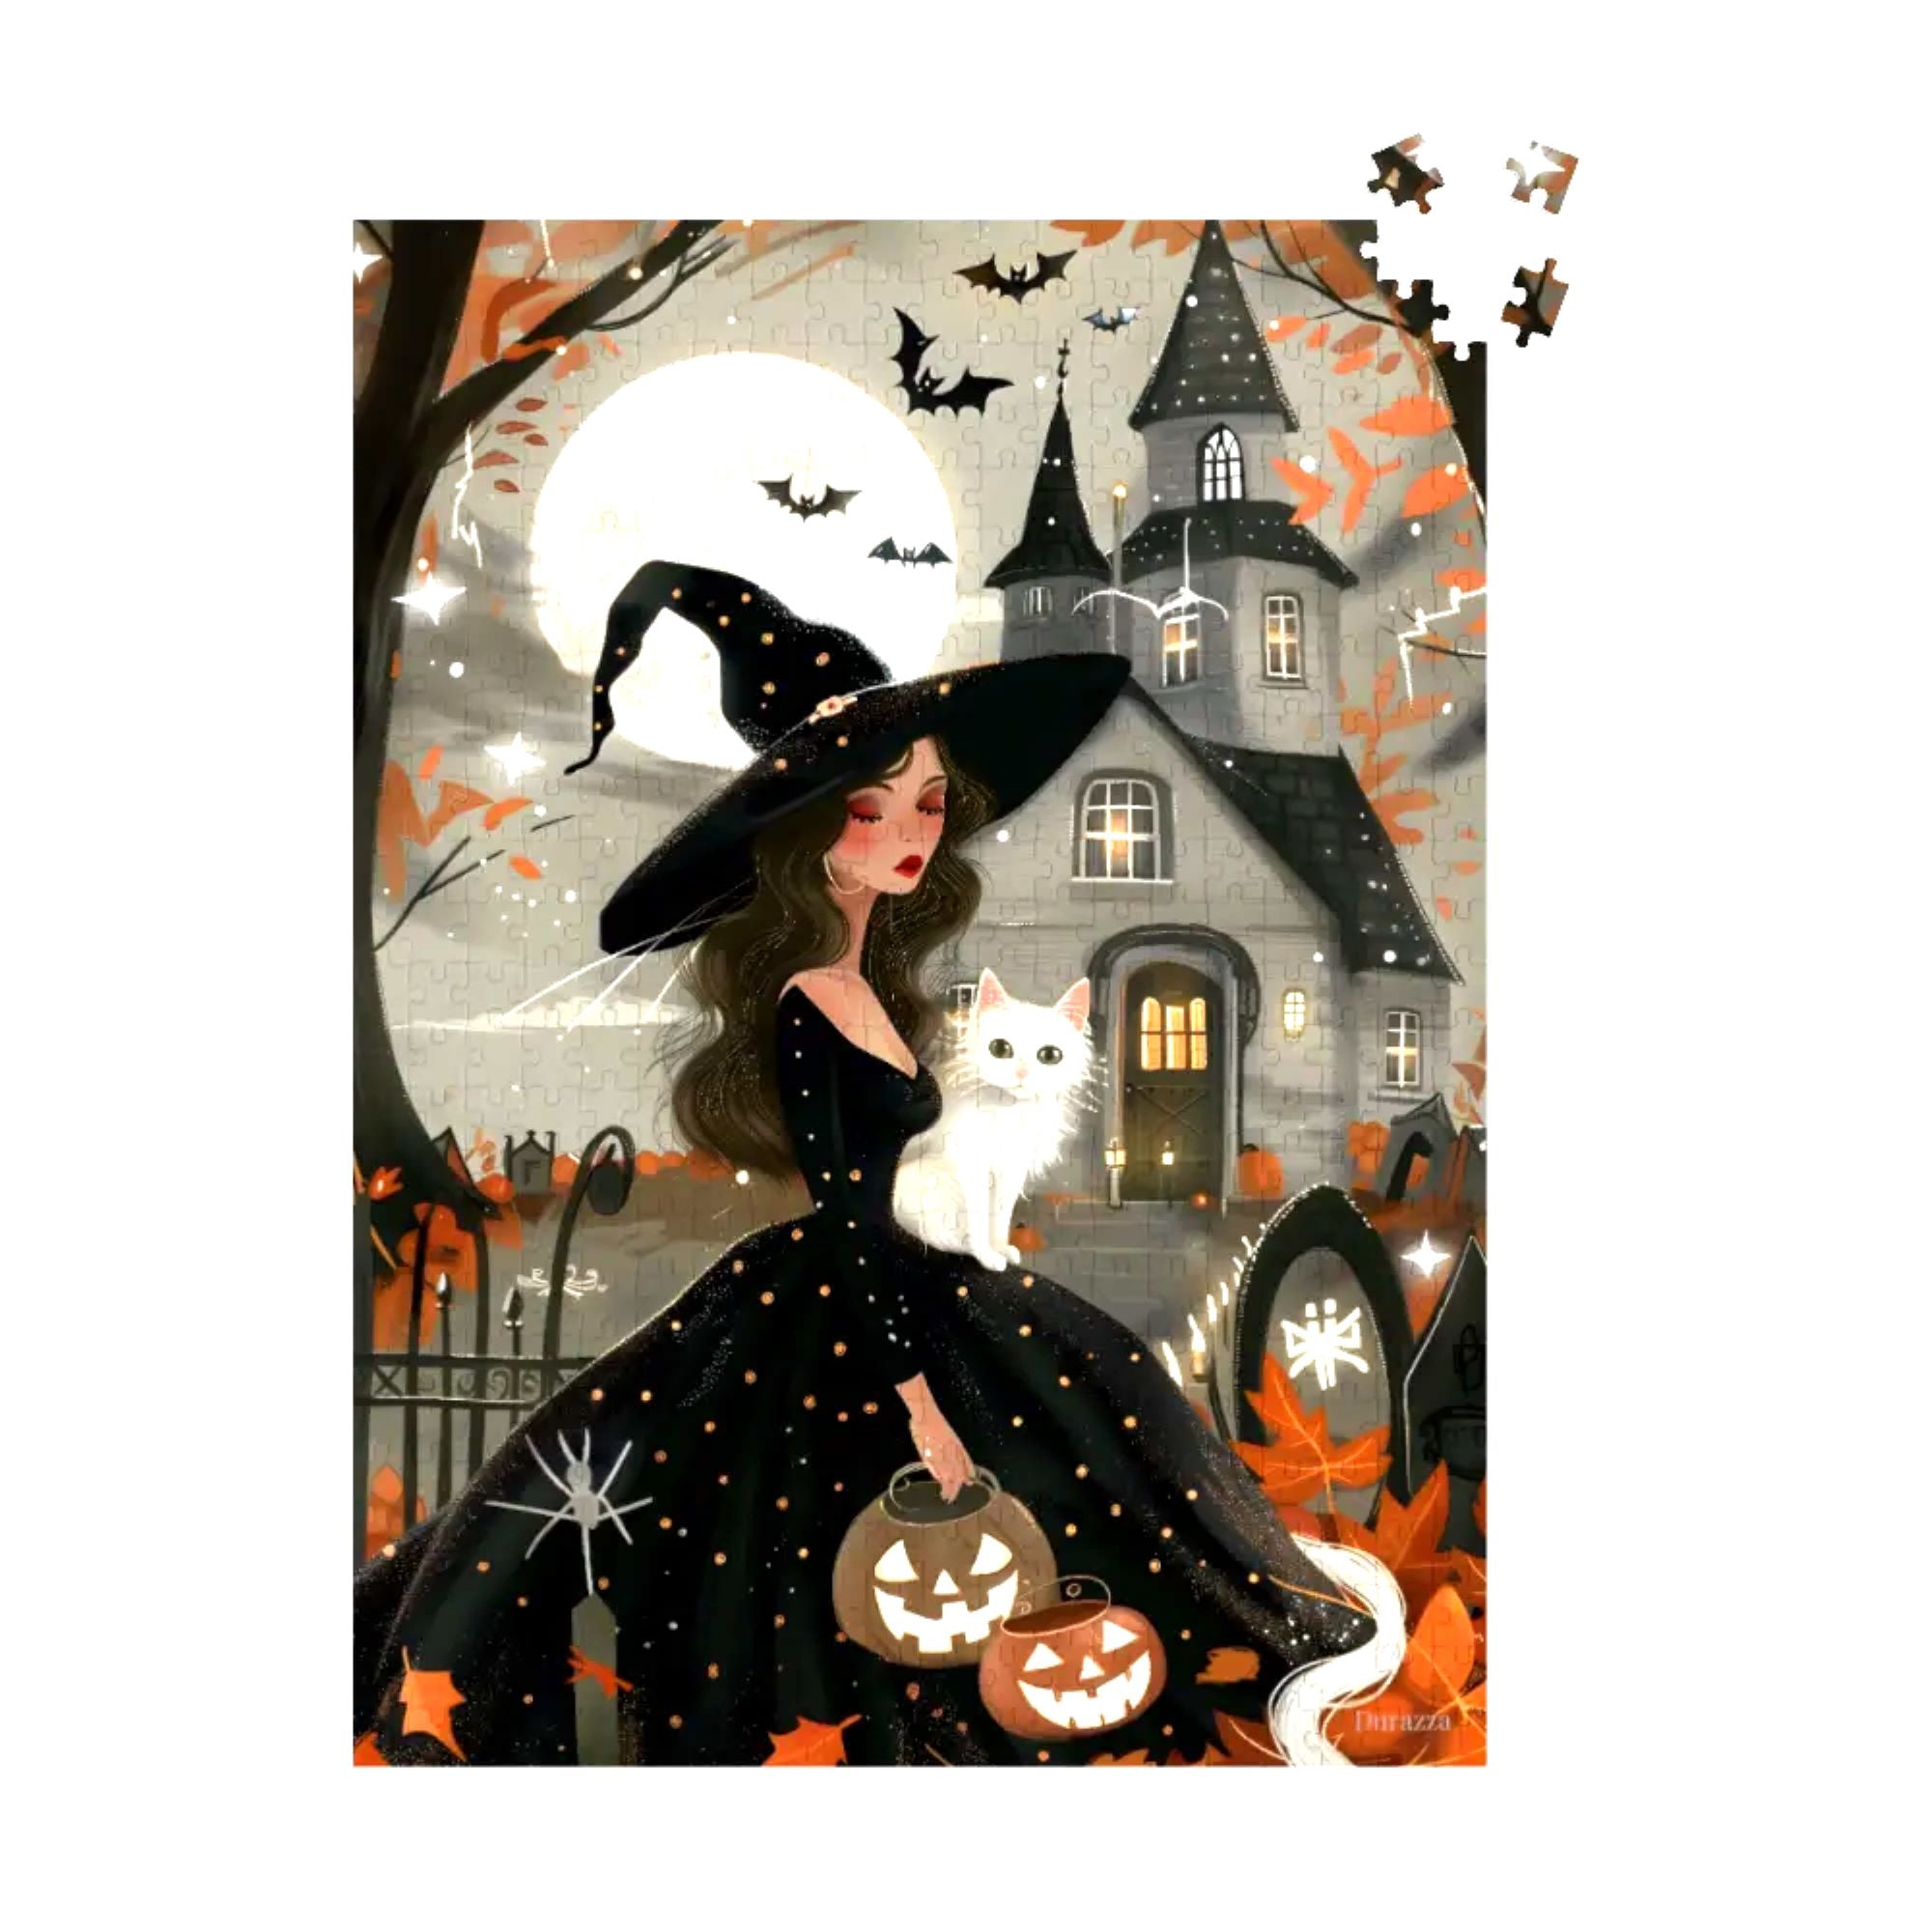 Moonlight Witch Jigsaw Puzzle 500 or 1000 Piece